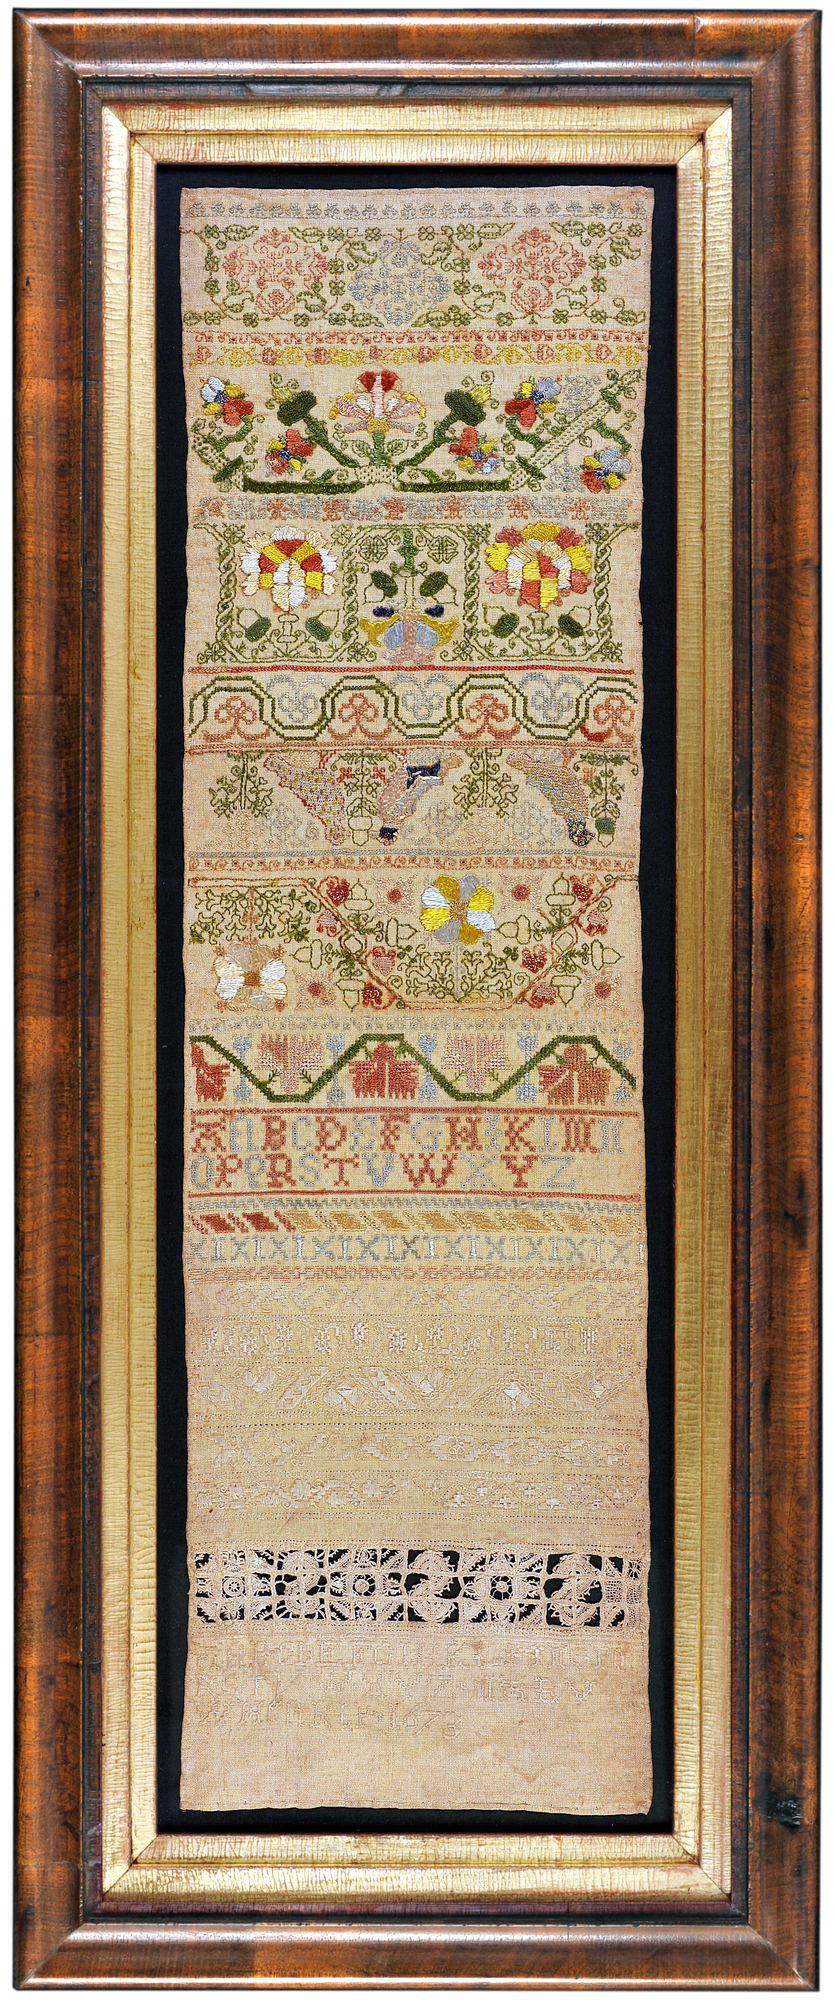 Sampler by Mary Whearly, 1673